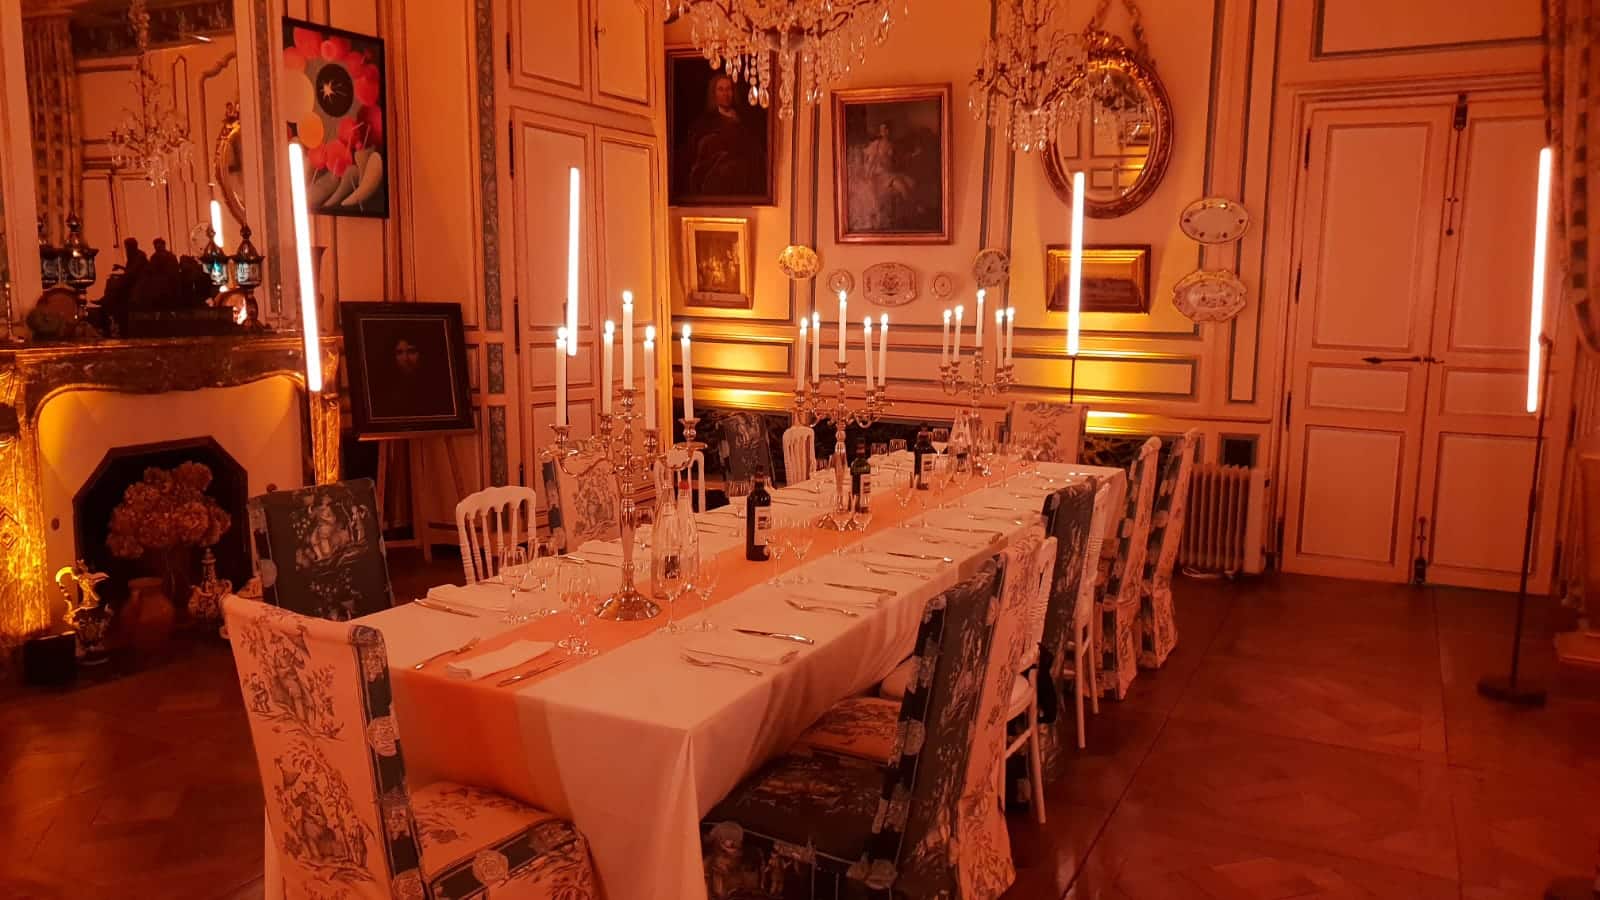 diner leboncoin wato we are the oracle evenementiel soiree rennes chateau boschet table light ax1 scenographie